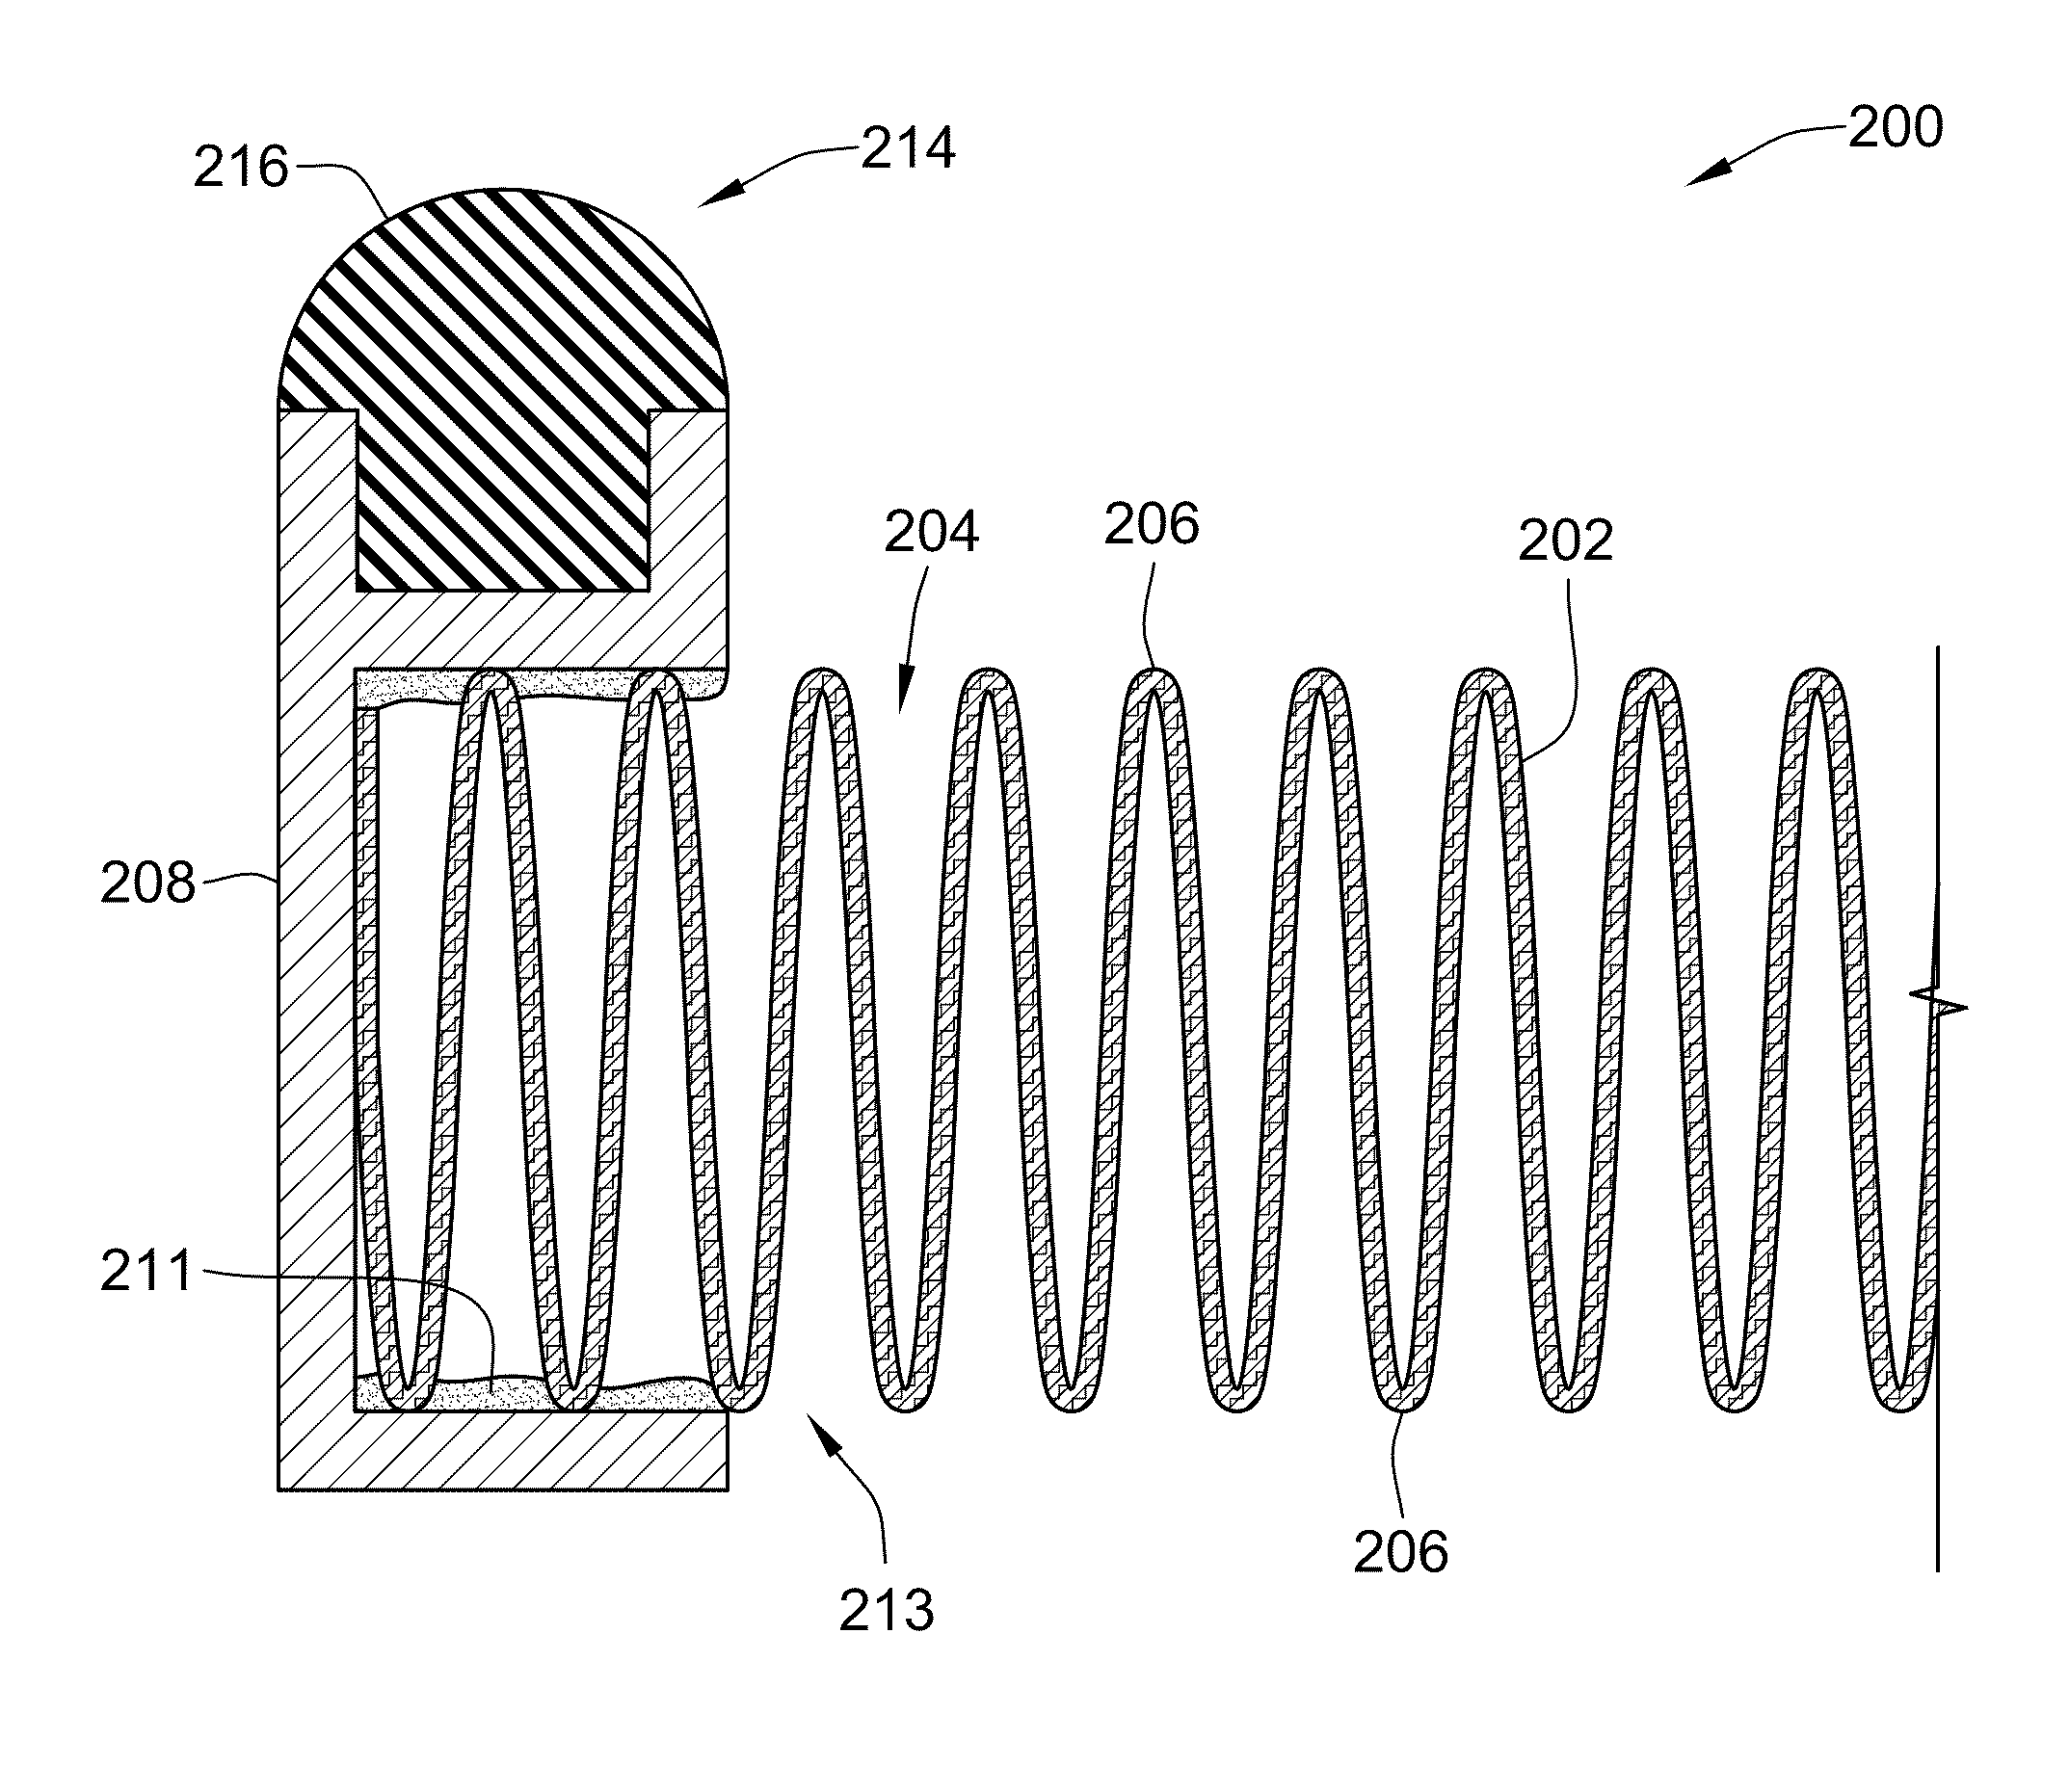 Membrane-free filter and/or integral framing for filter